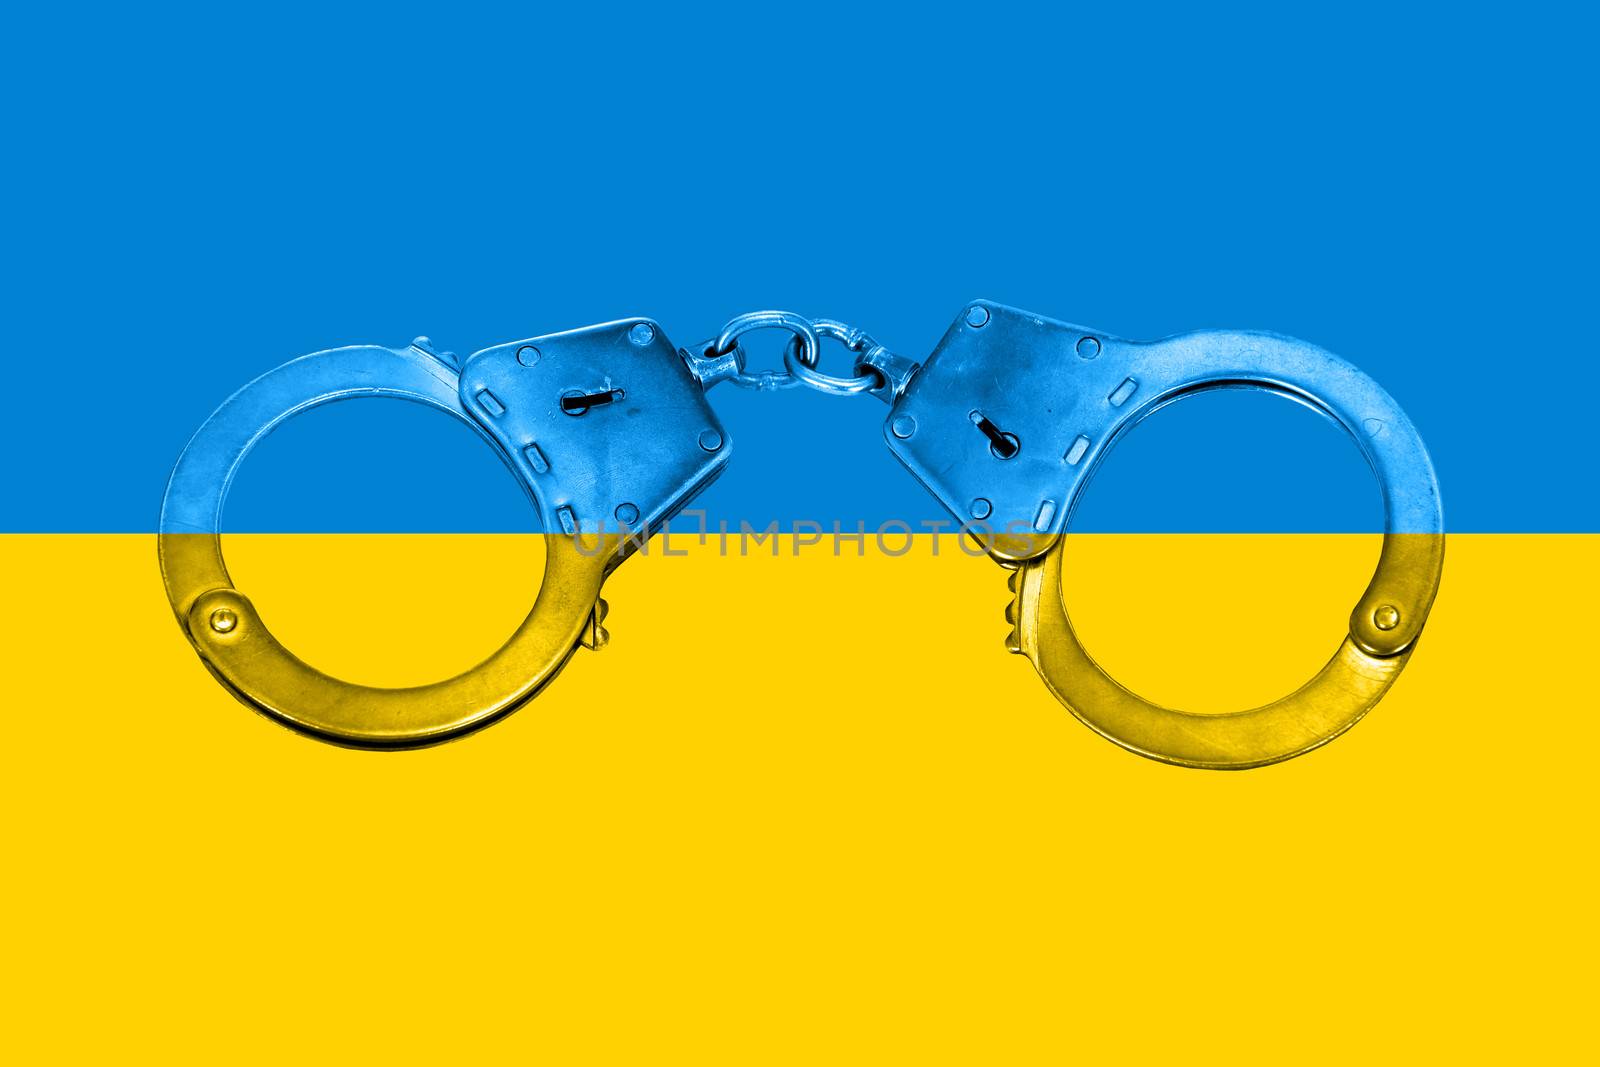 Ukrainian Flag and Handcuffs by sabphoto